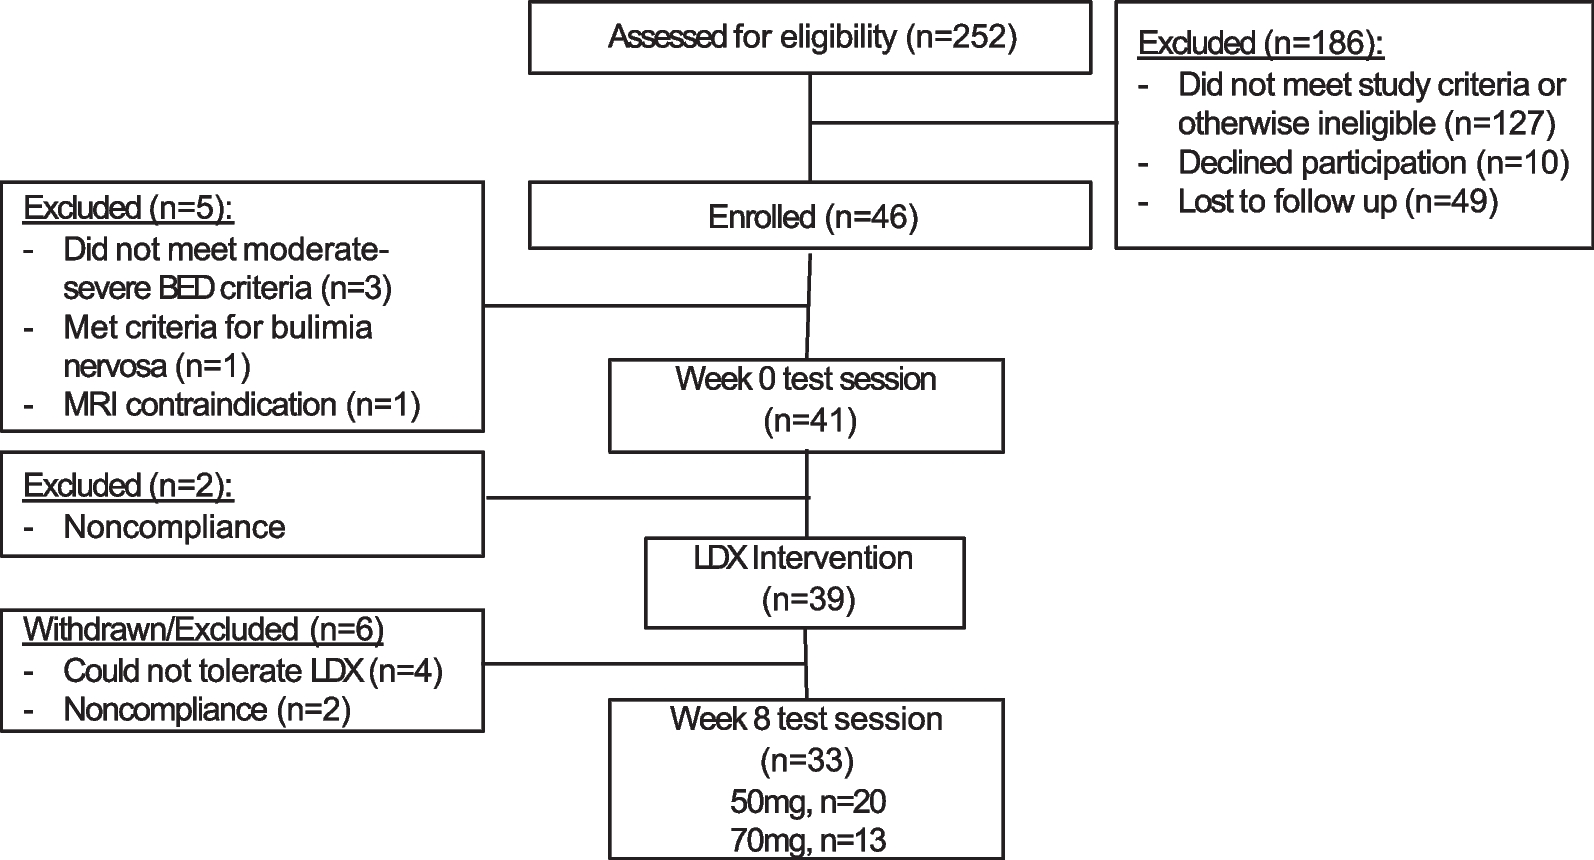 Exploring bi-directional impacts of Lisdexamfetamine dimesylate on psychological comorbidities and quality of life in people with Binge Eating Disorder